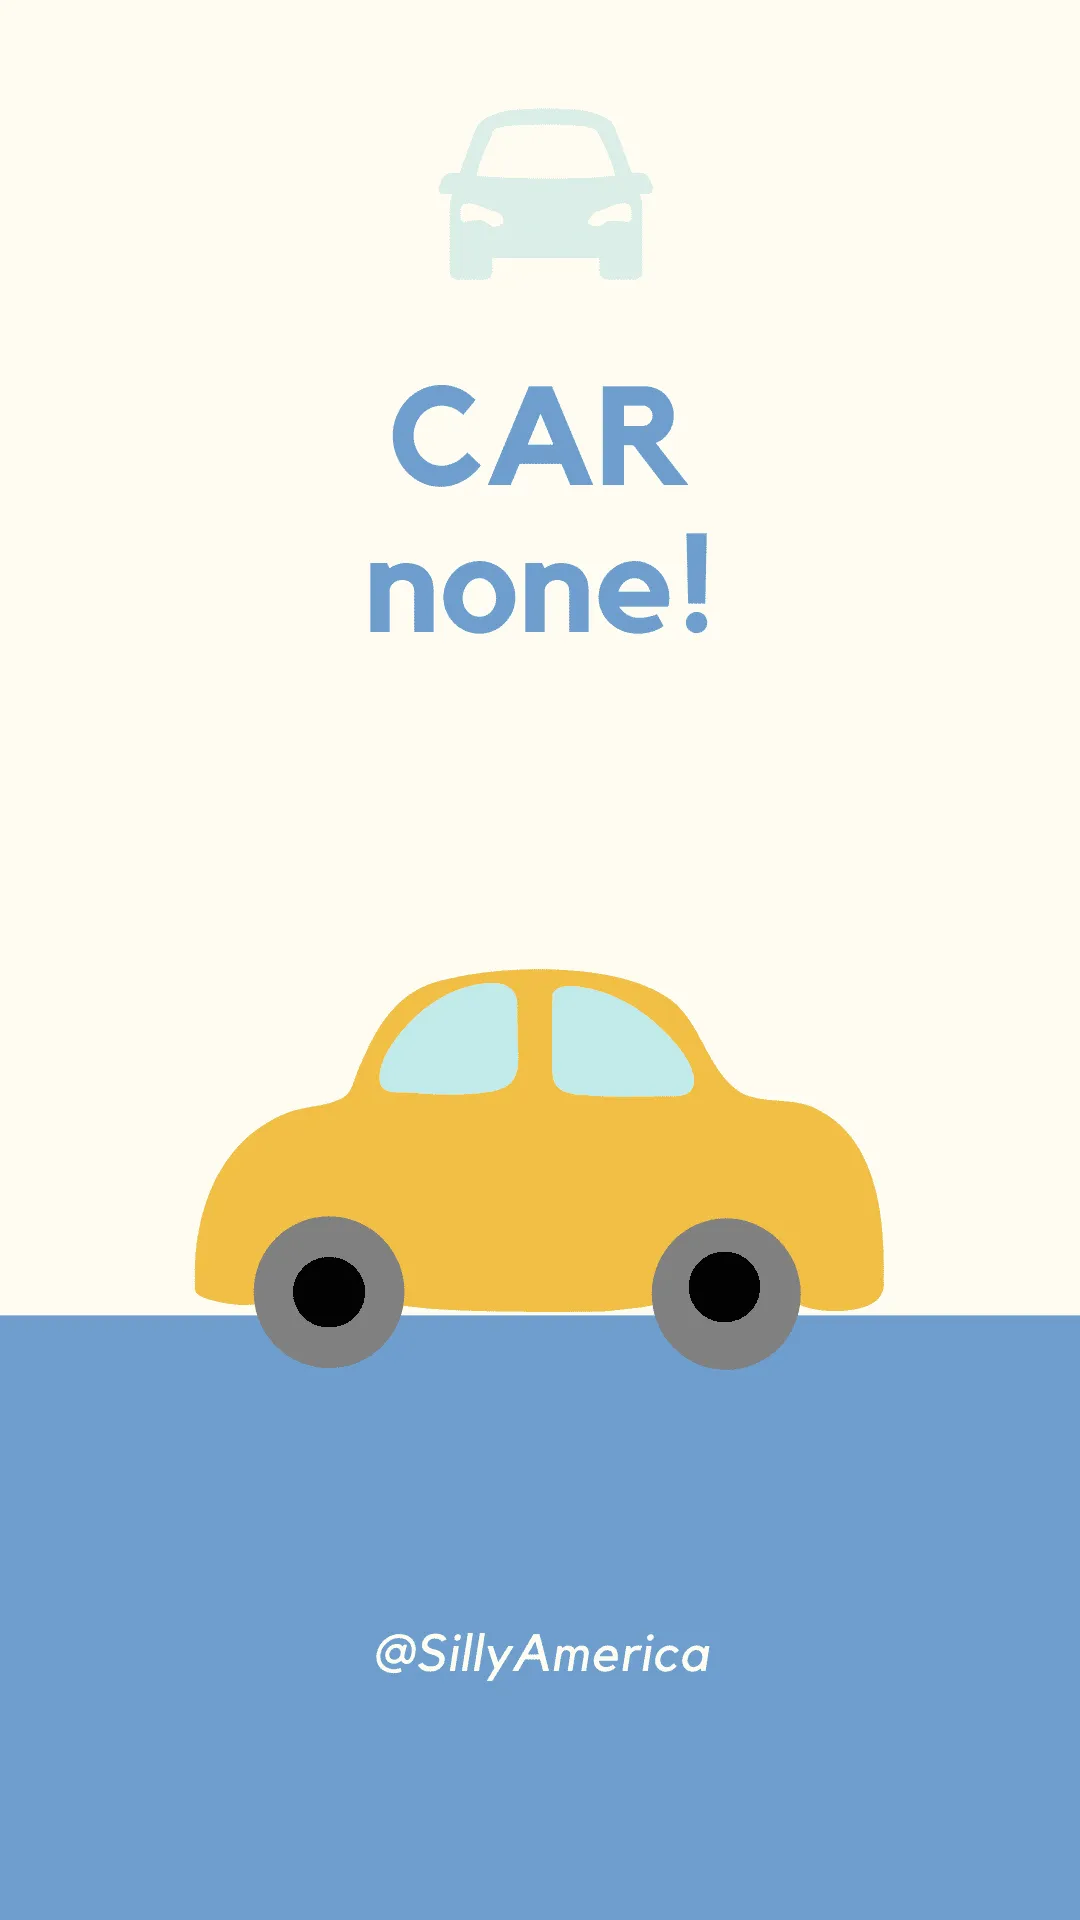 CAR none! - Car Puns to fuel your road trip content!